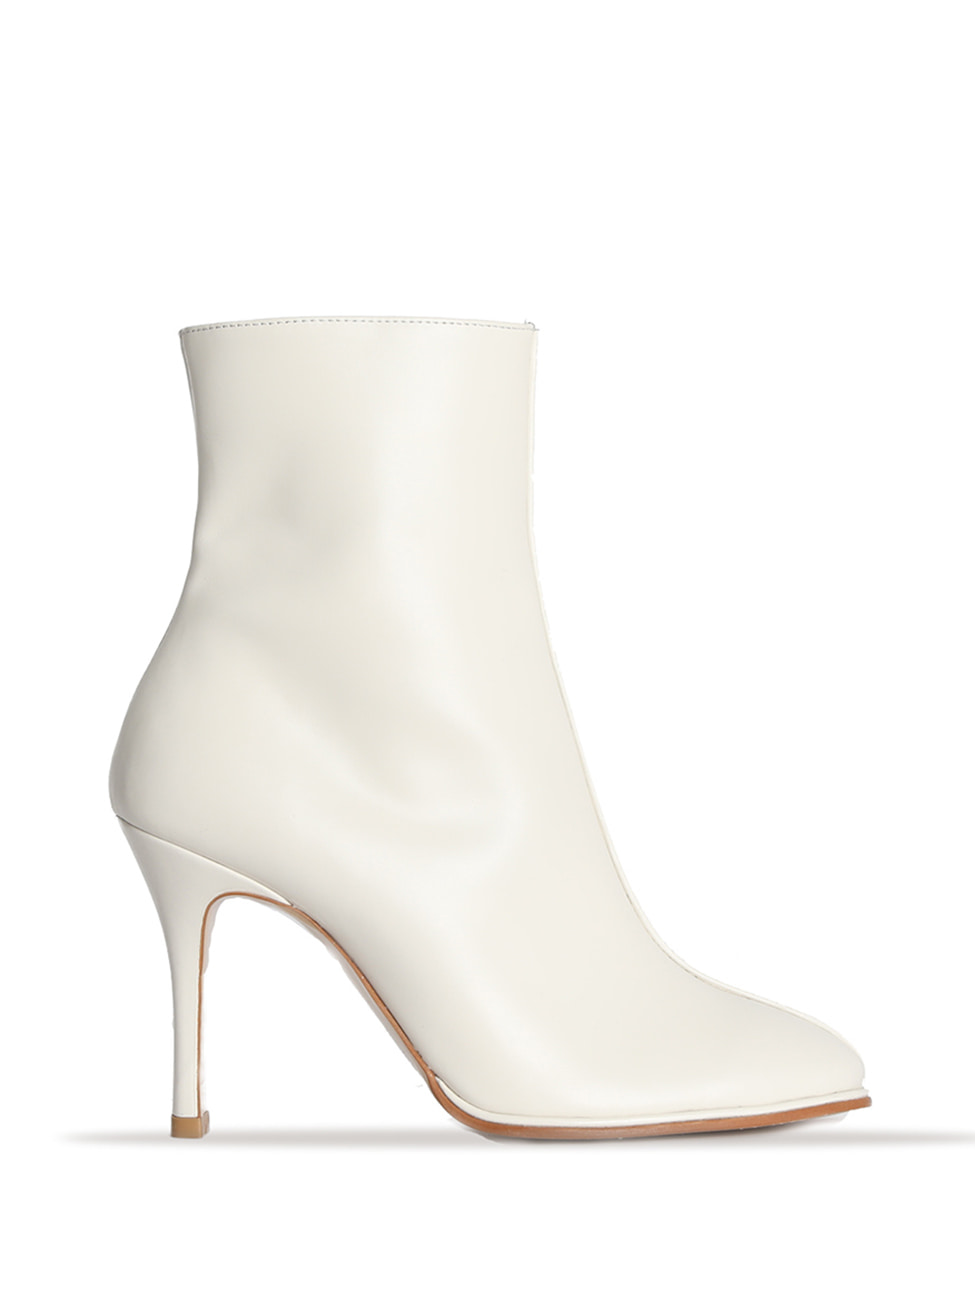 LINDA LEATHER ANKLE BOOTS - IVORY